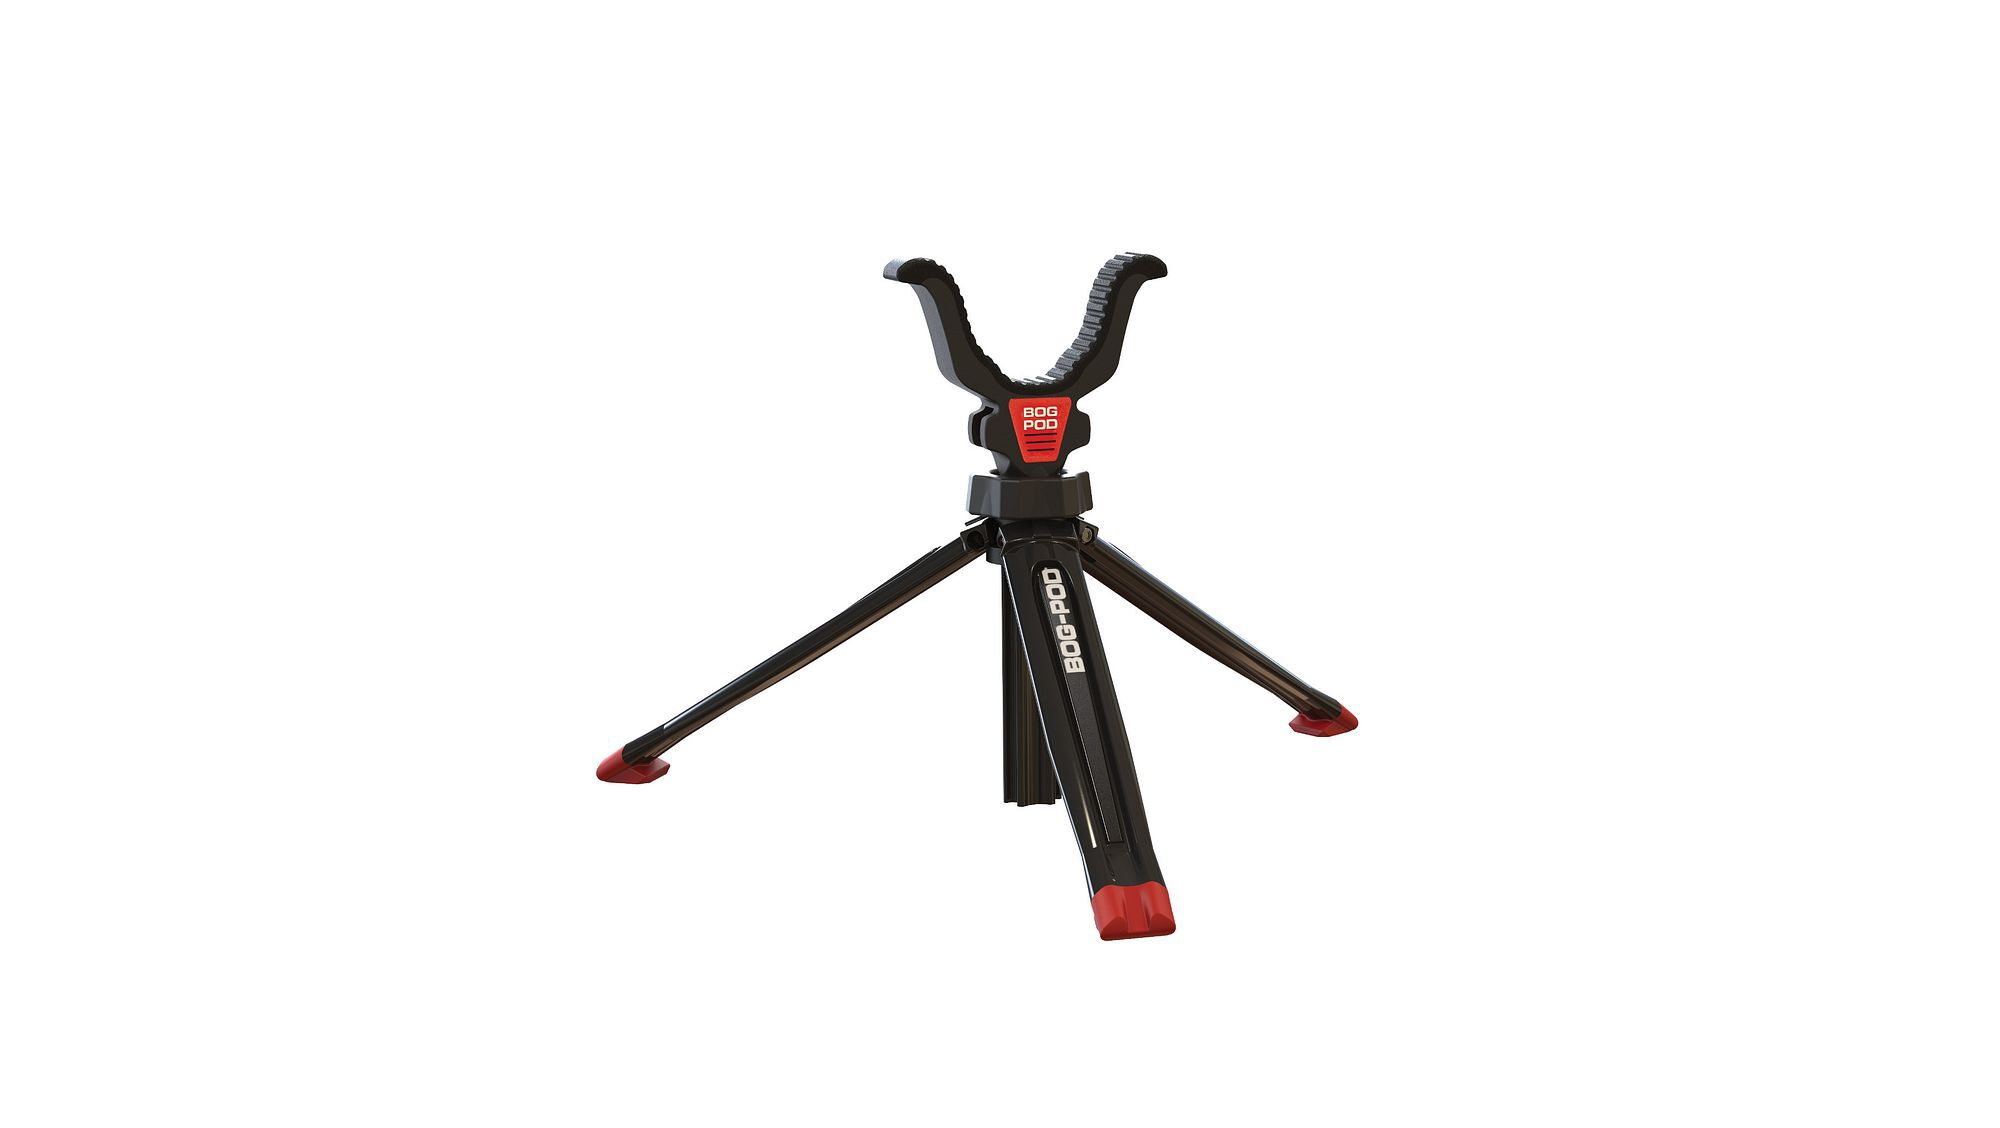 Details about  / Portable Gun Shooting Rest Adjustable Height Tripod Rapid Hunting Crossbow Rifle